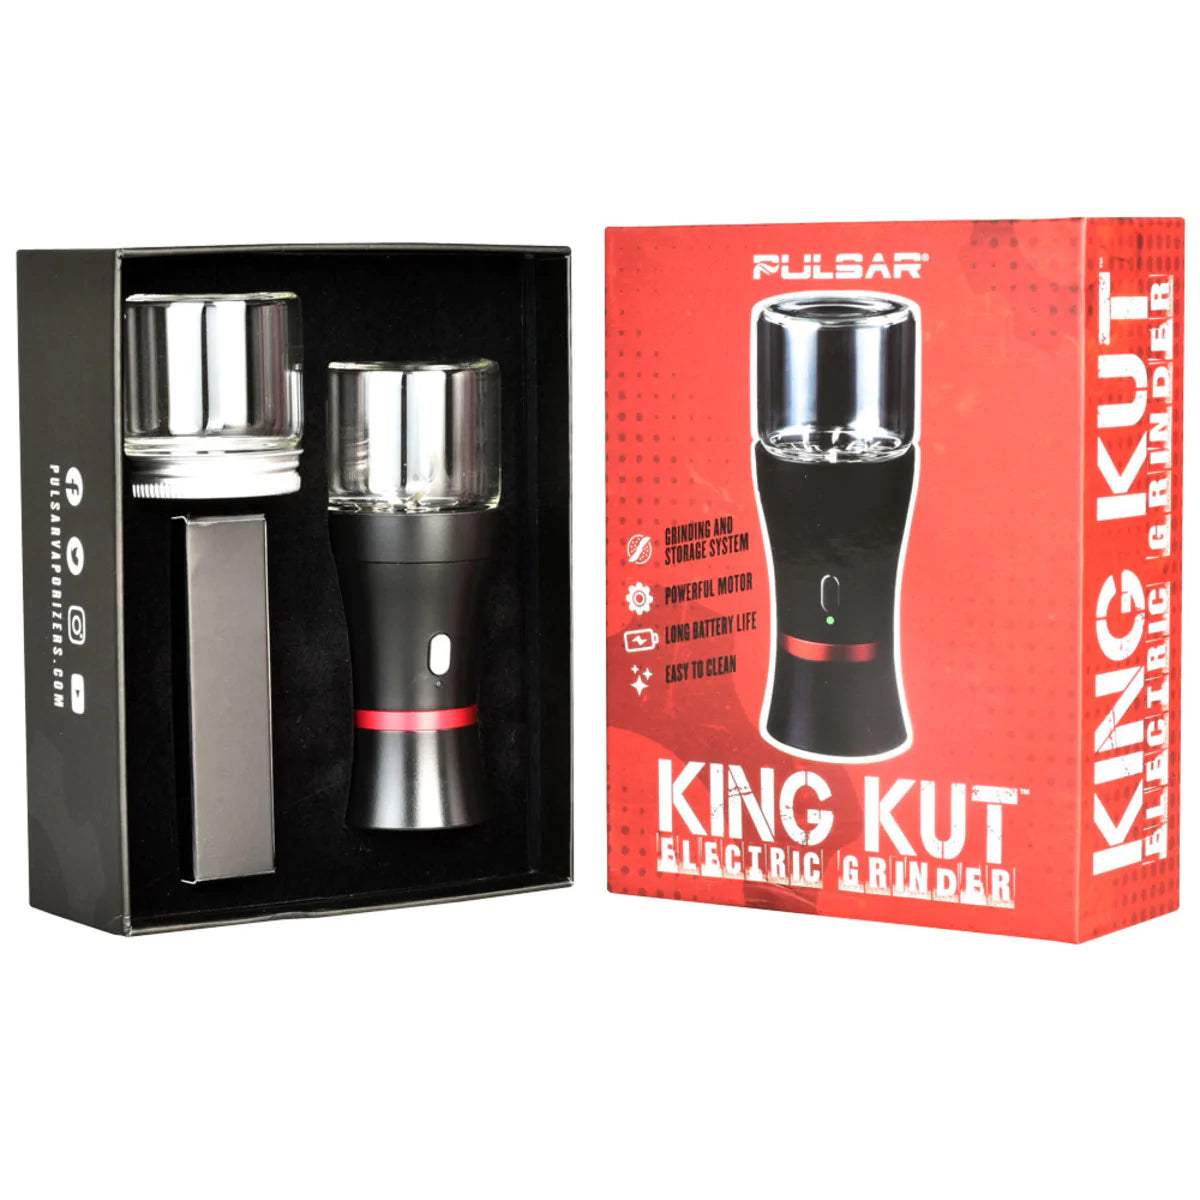 Pulsar King Kut Electric Grinder with packaging, battery-powered, steel construction